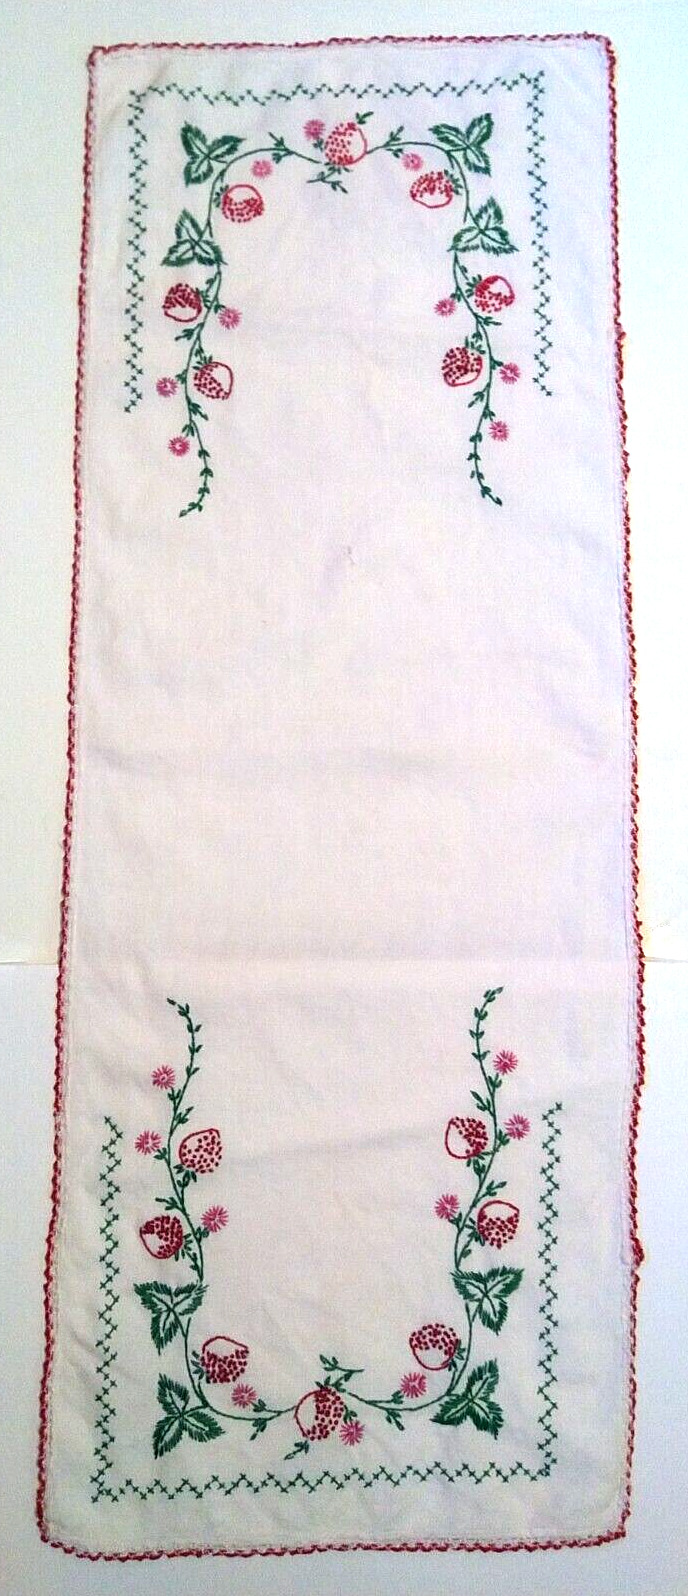 Vintage Table Runner Linen Embroidery Strawberry Floral 38x14 Inch Needle Work